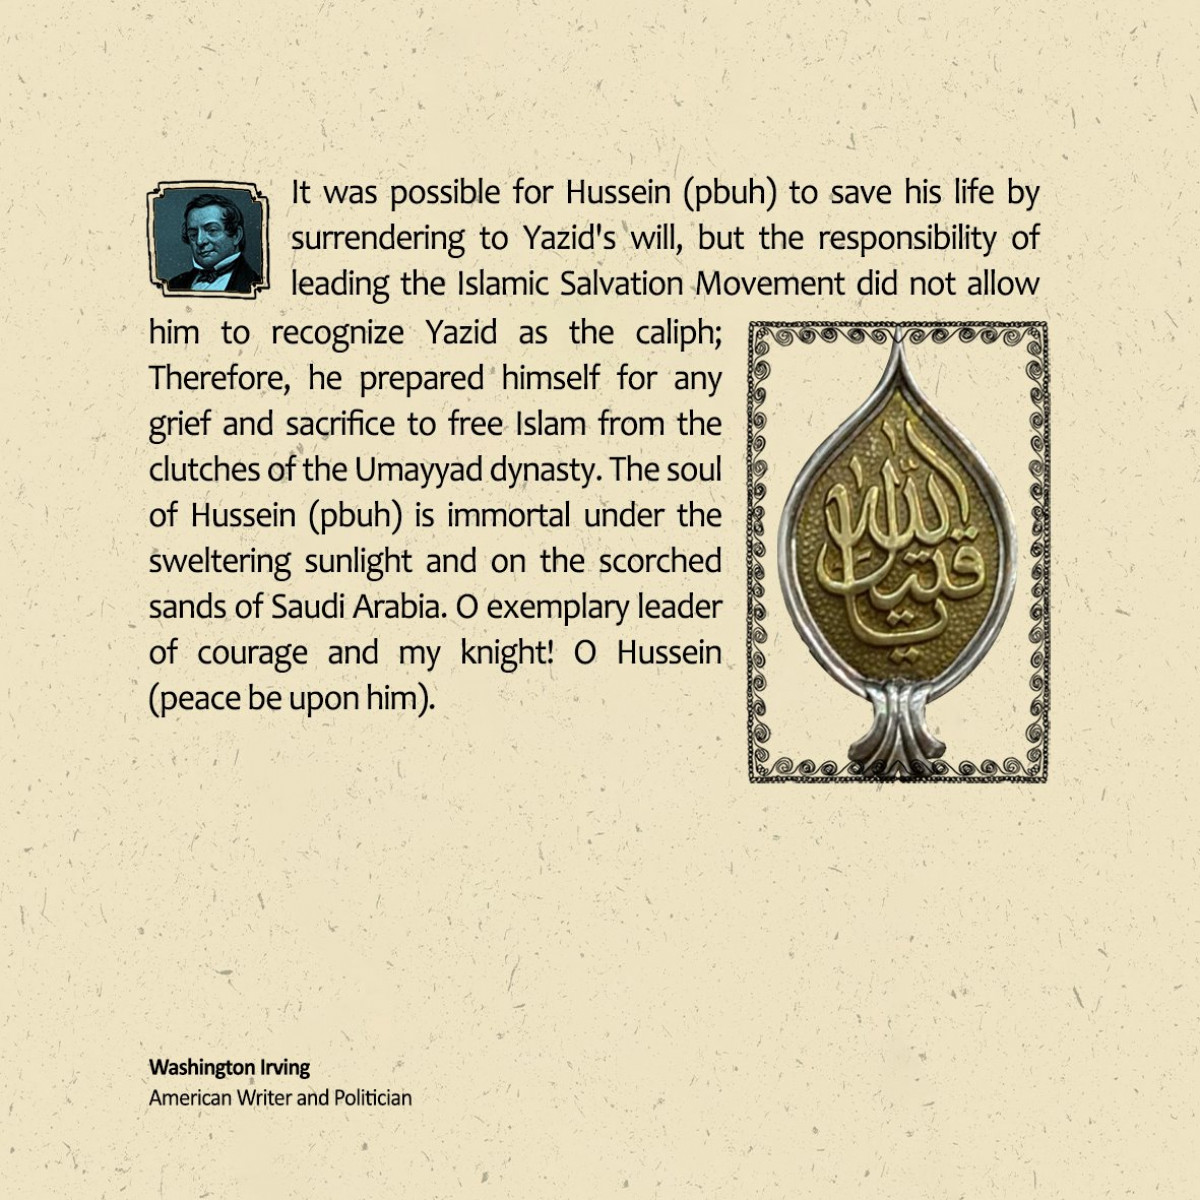 It was possible for Hussein (pbuh) to save his life by surrendering to Yazid's will